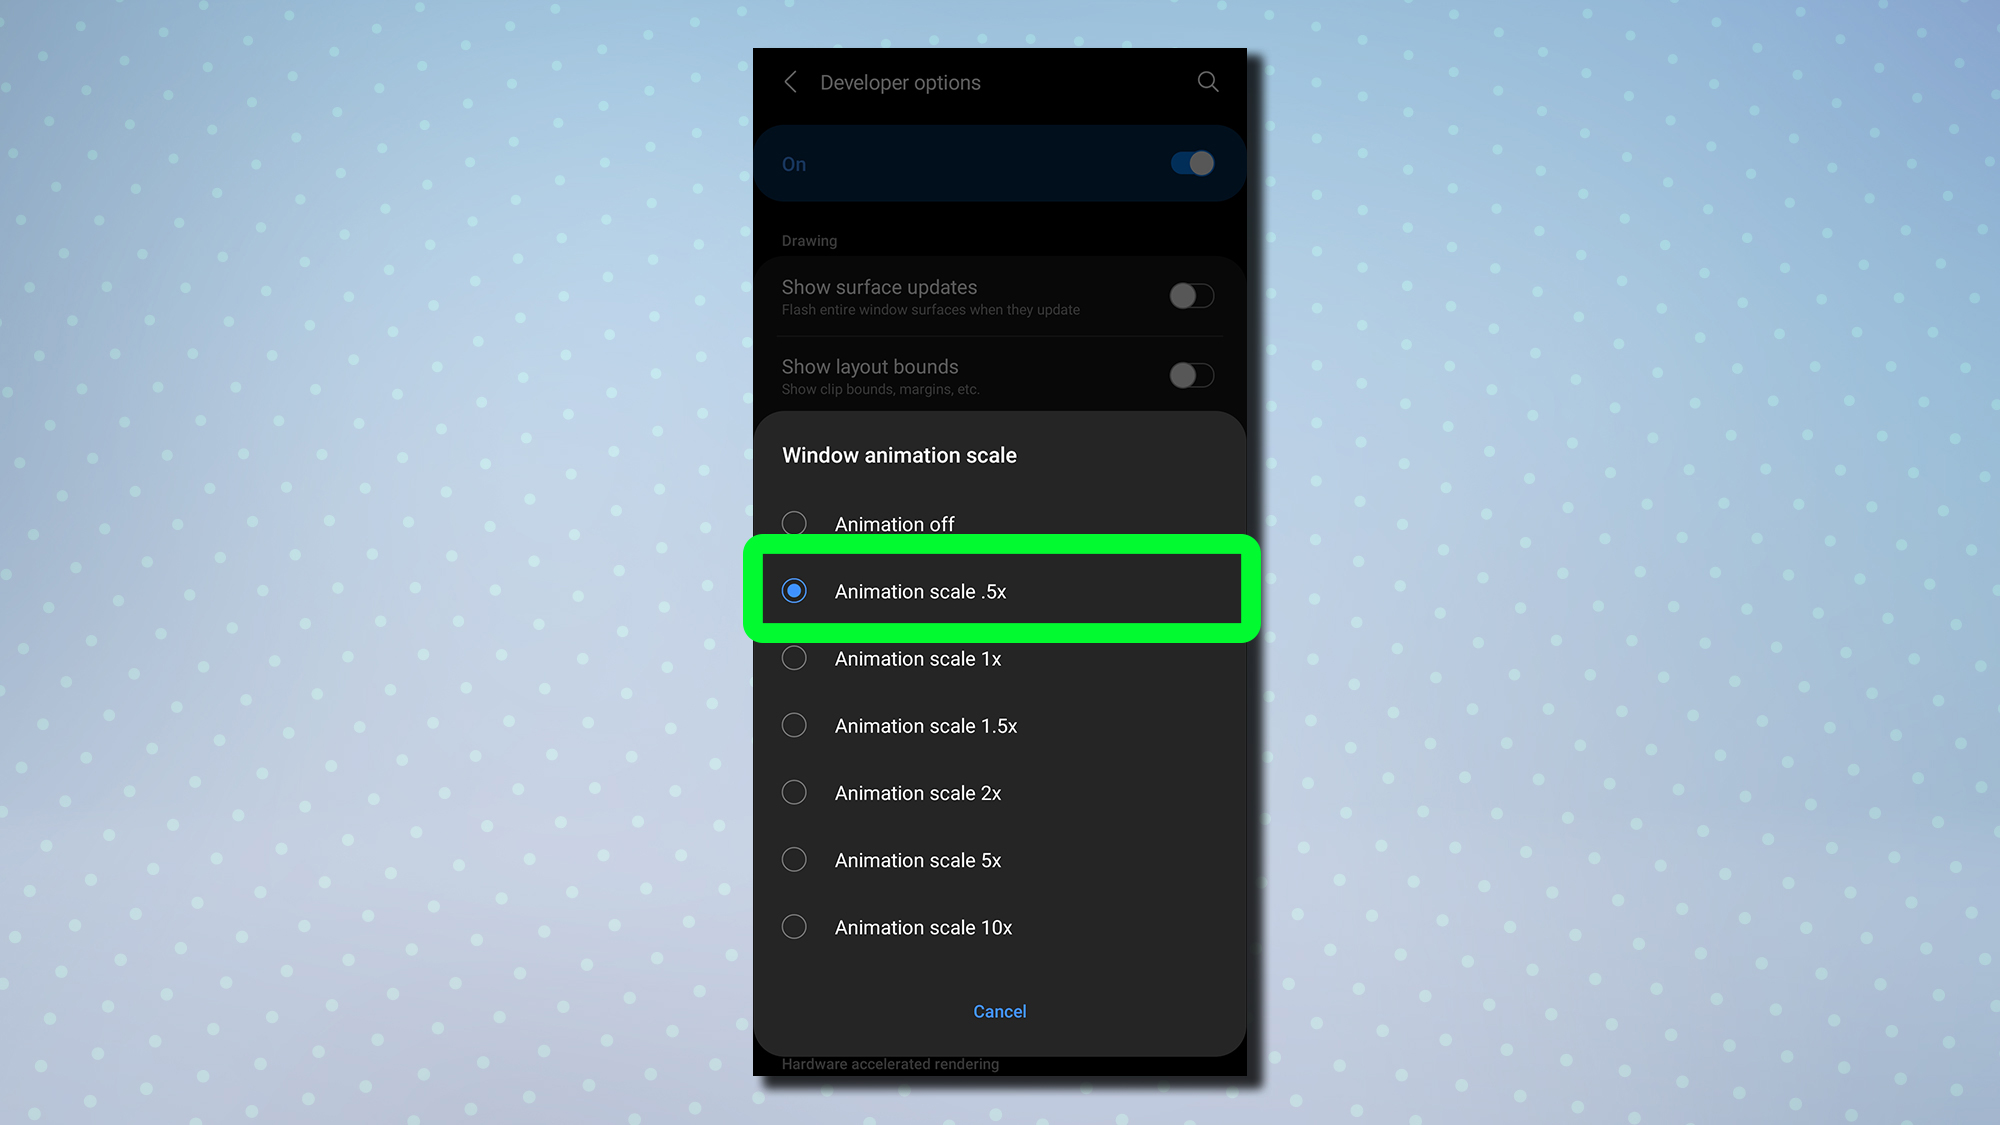 A screenshot showing the Android developer options menu with window animation scale highlighted